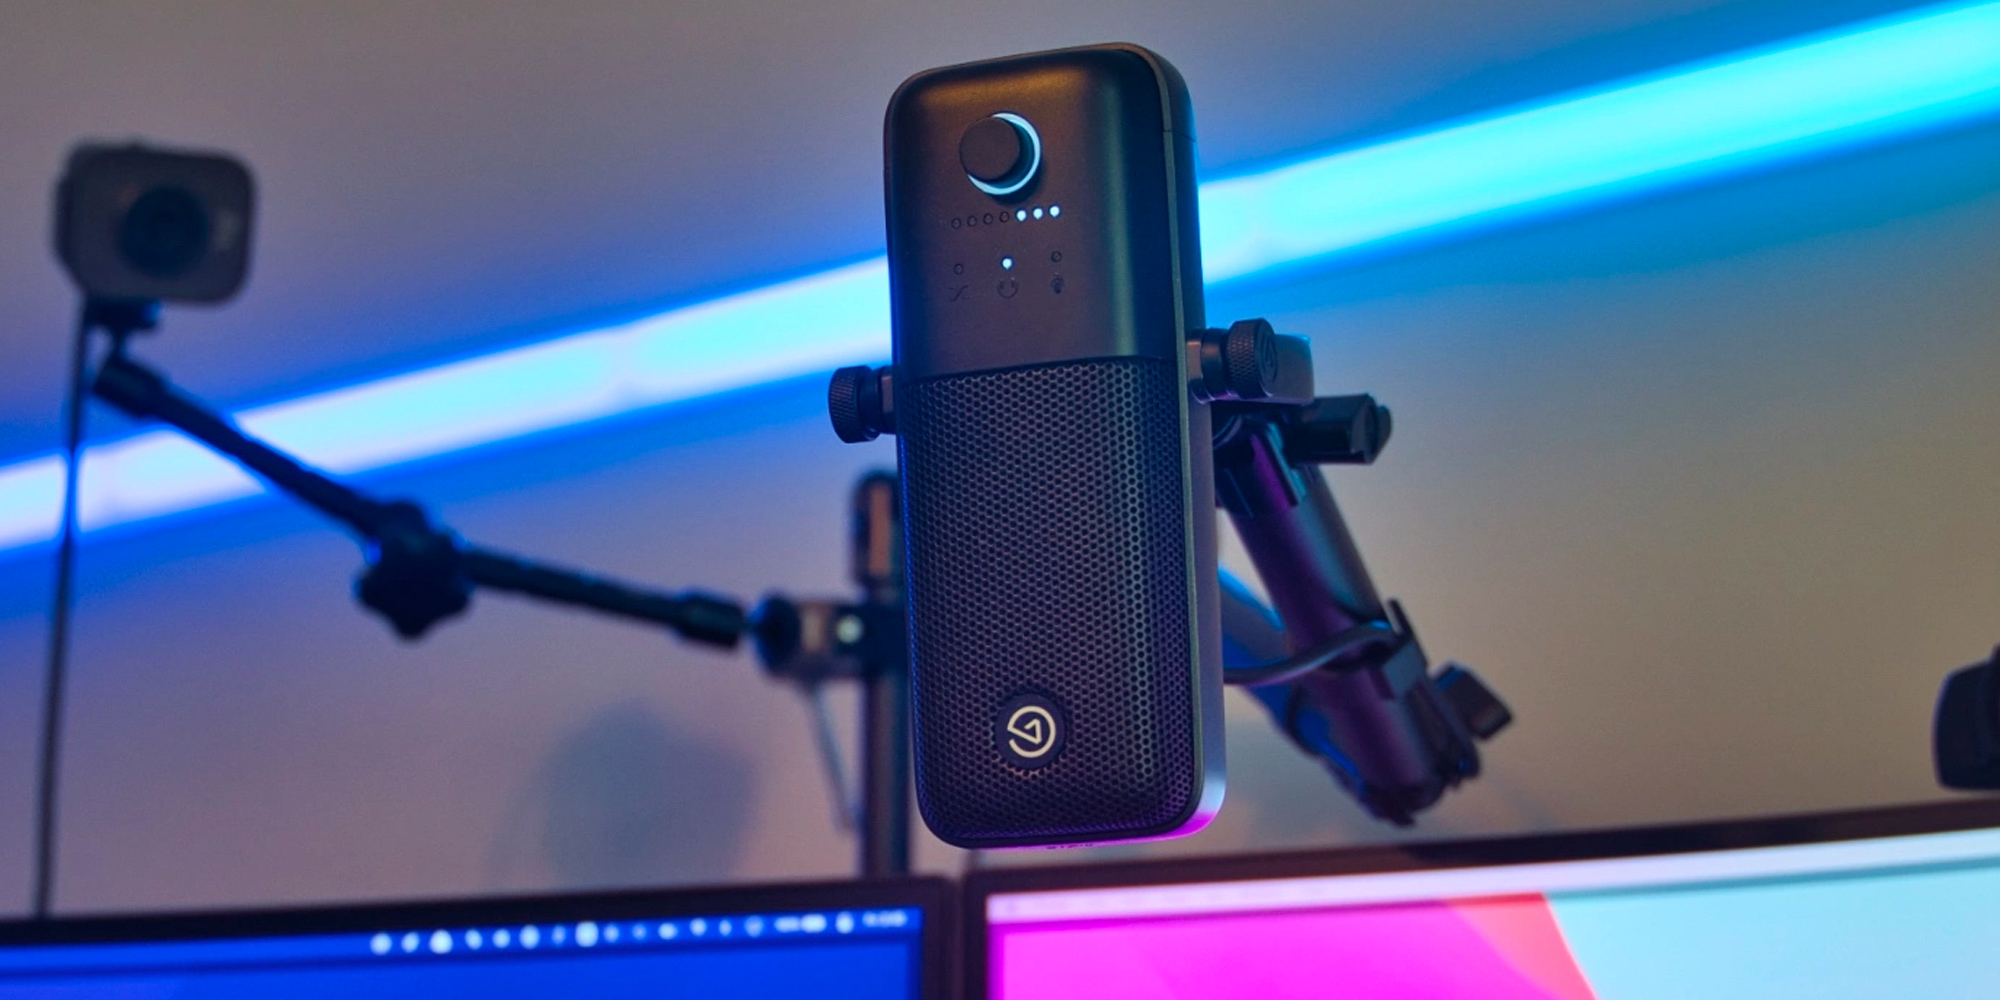 Elgato's Wave:3 delivers a USB-C microphone with full audio